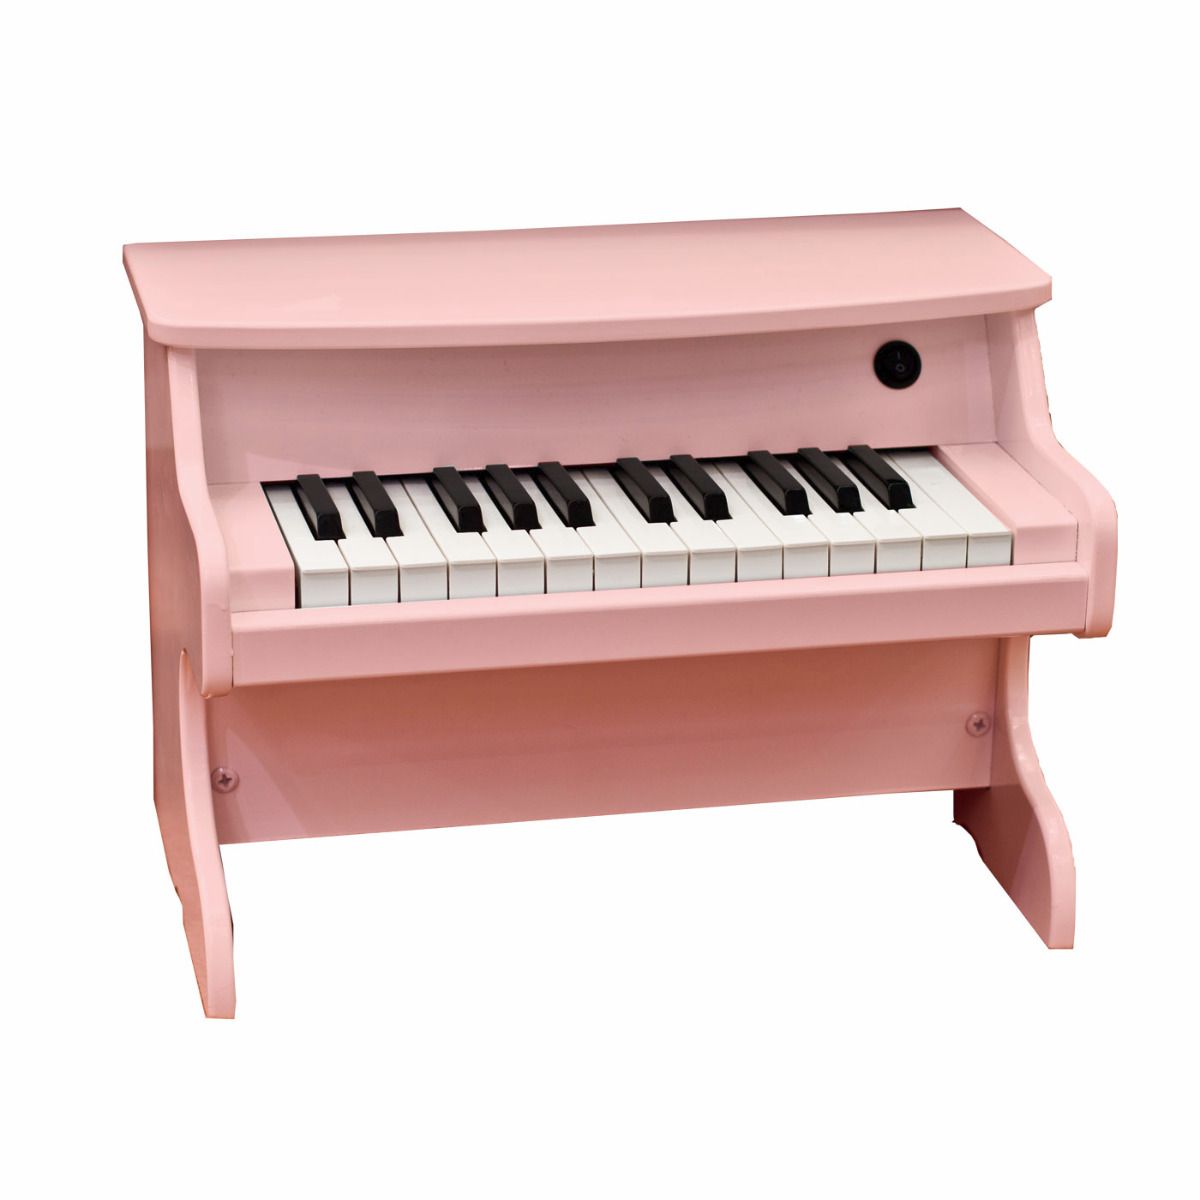 CHASE CDP-121 Mini Digital Piano In High Gloss Colour Finishes - Pink/White